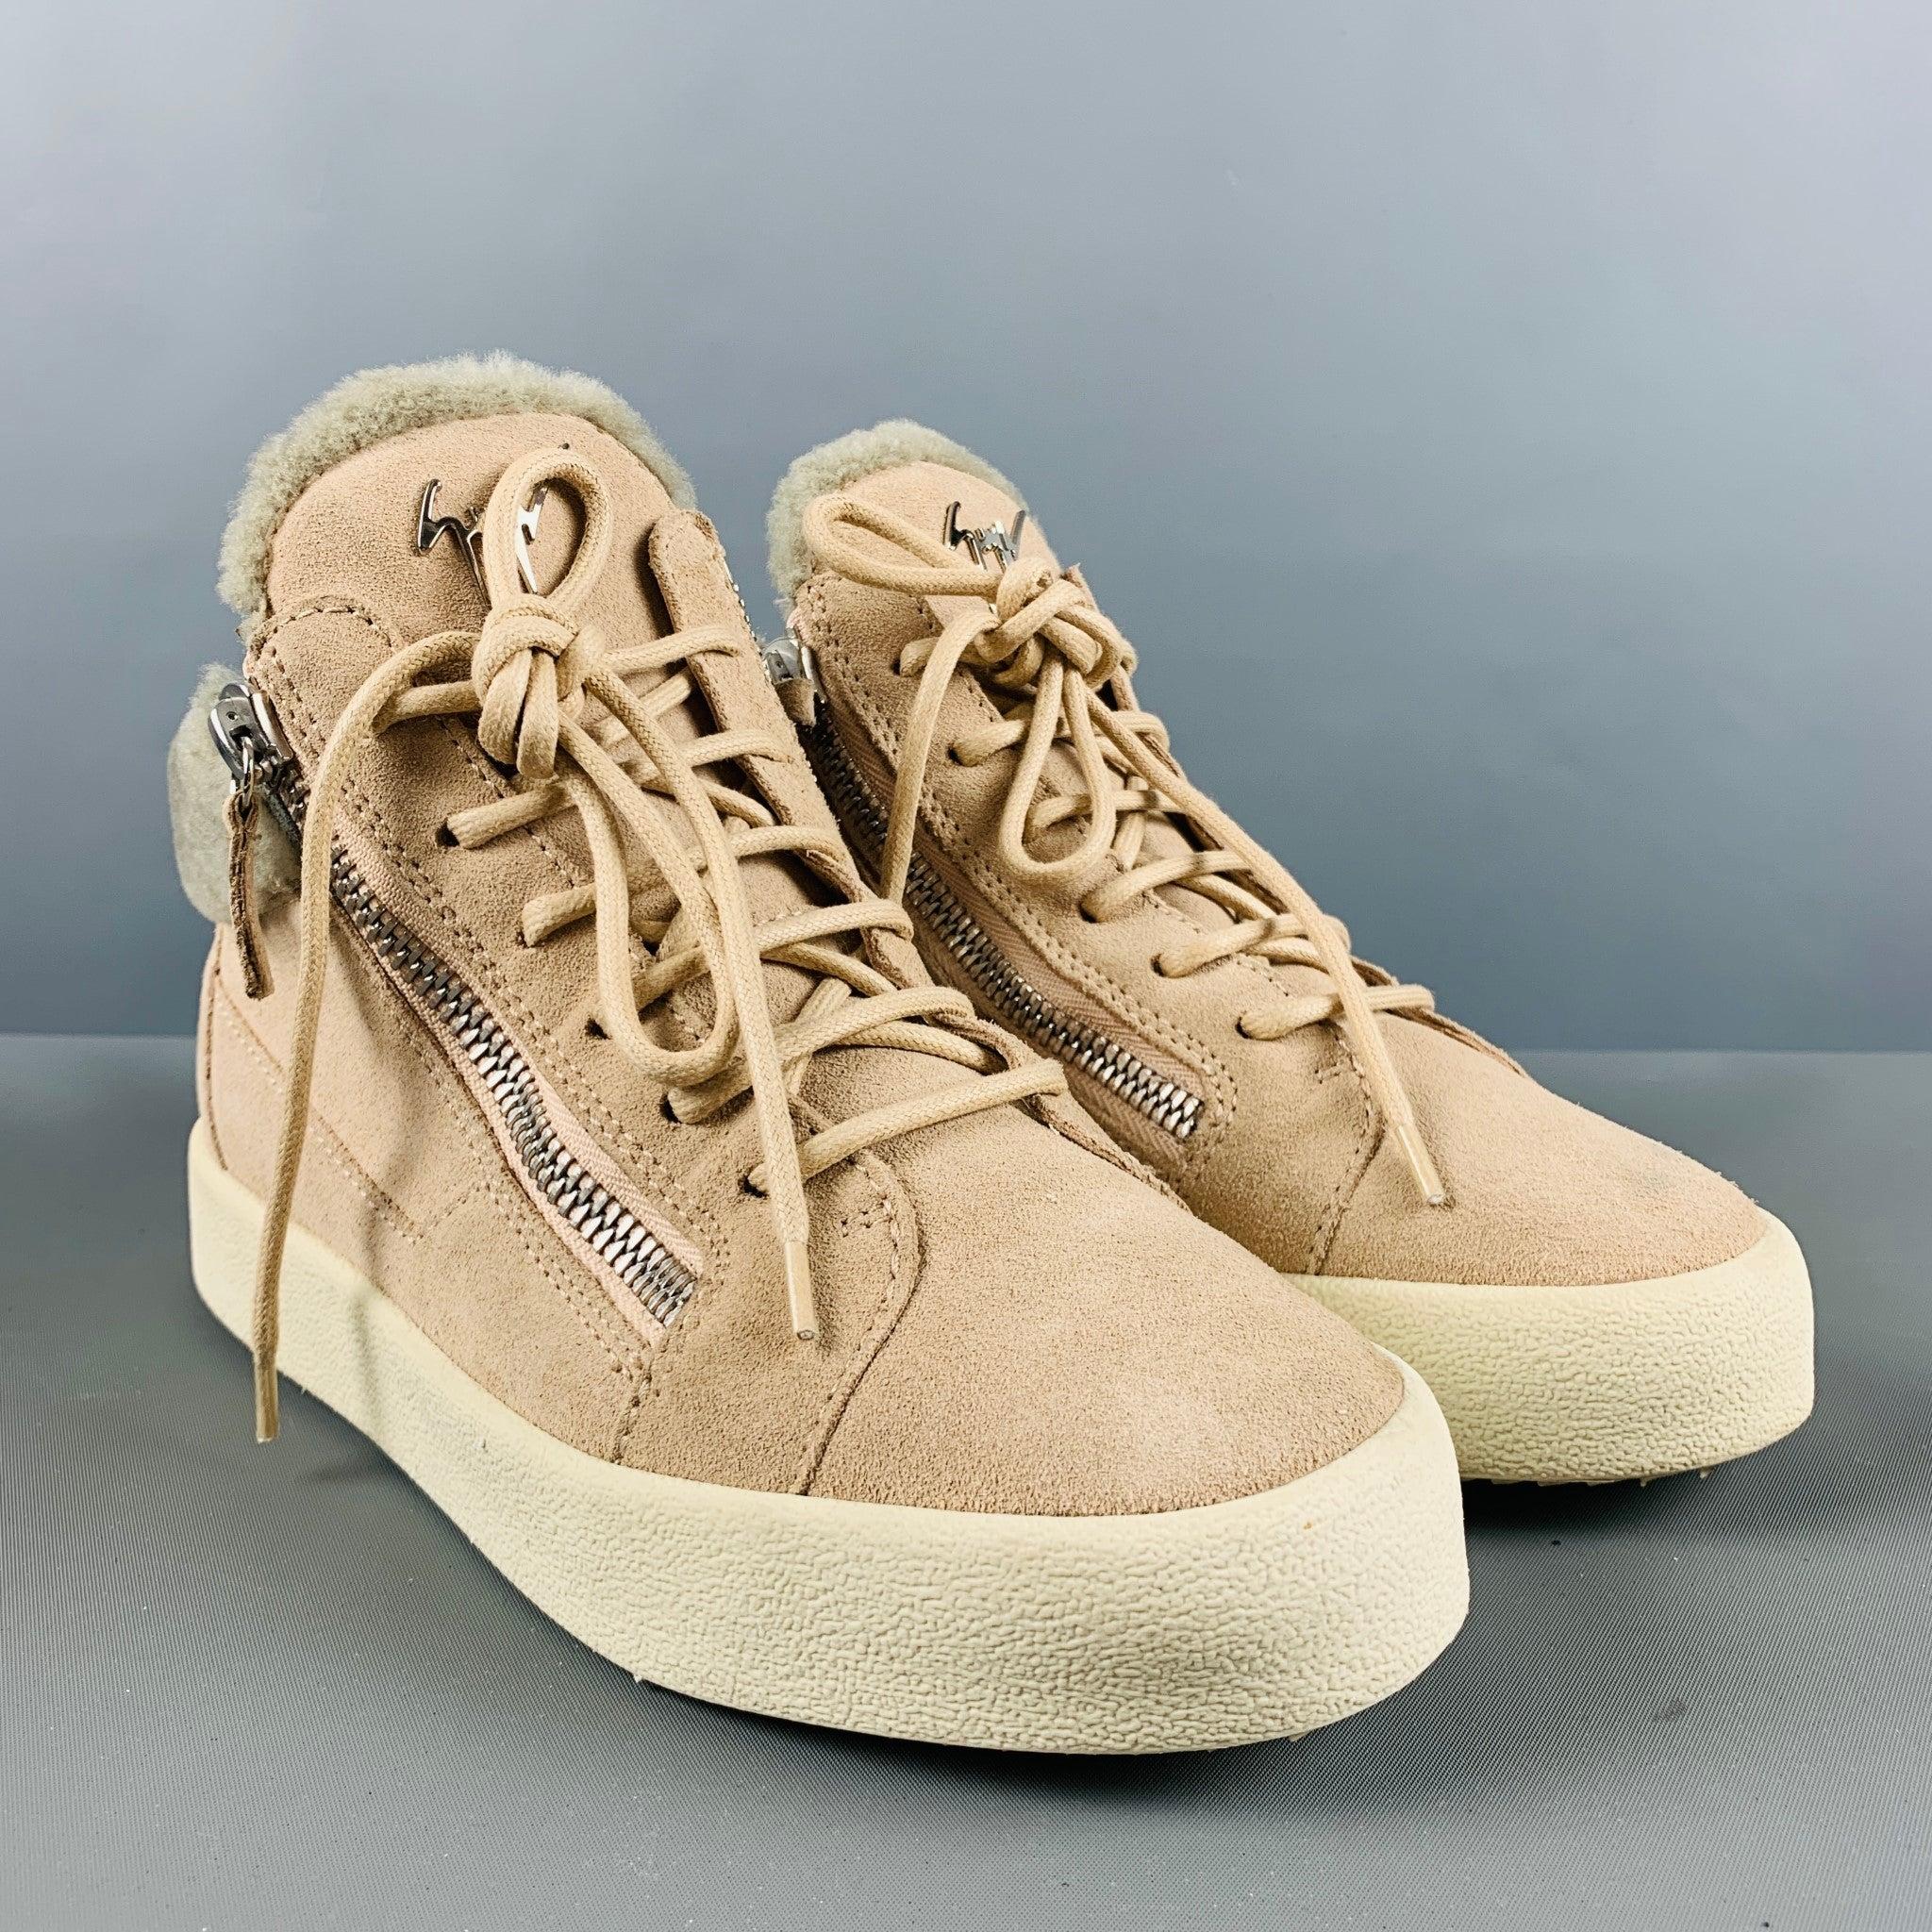 GIUSEPPE ZANOTTI sneakers comes in a grey & pink suede featuring a high top style, faux shearling, lace up, and a double side zipper closure. Made in Italy.Very Good Pre-Owned Condition. 

Marked:   39 1/2Outsole: 11 inches  x 4 inches  
  
  
